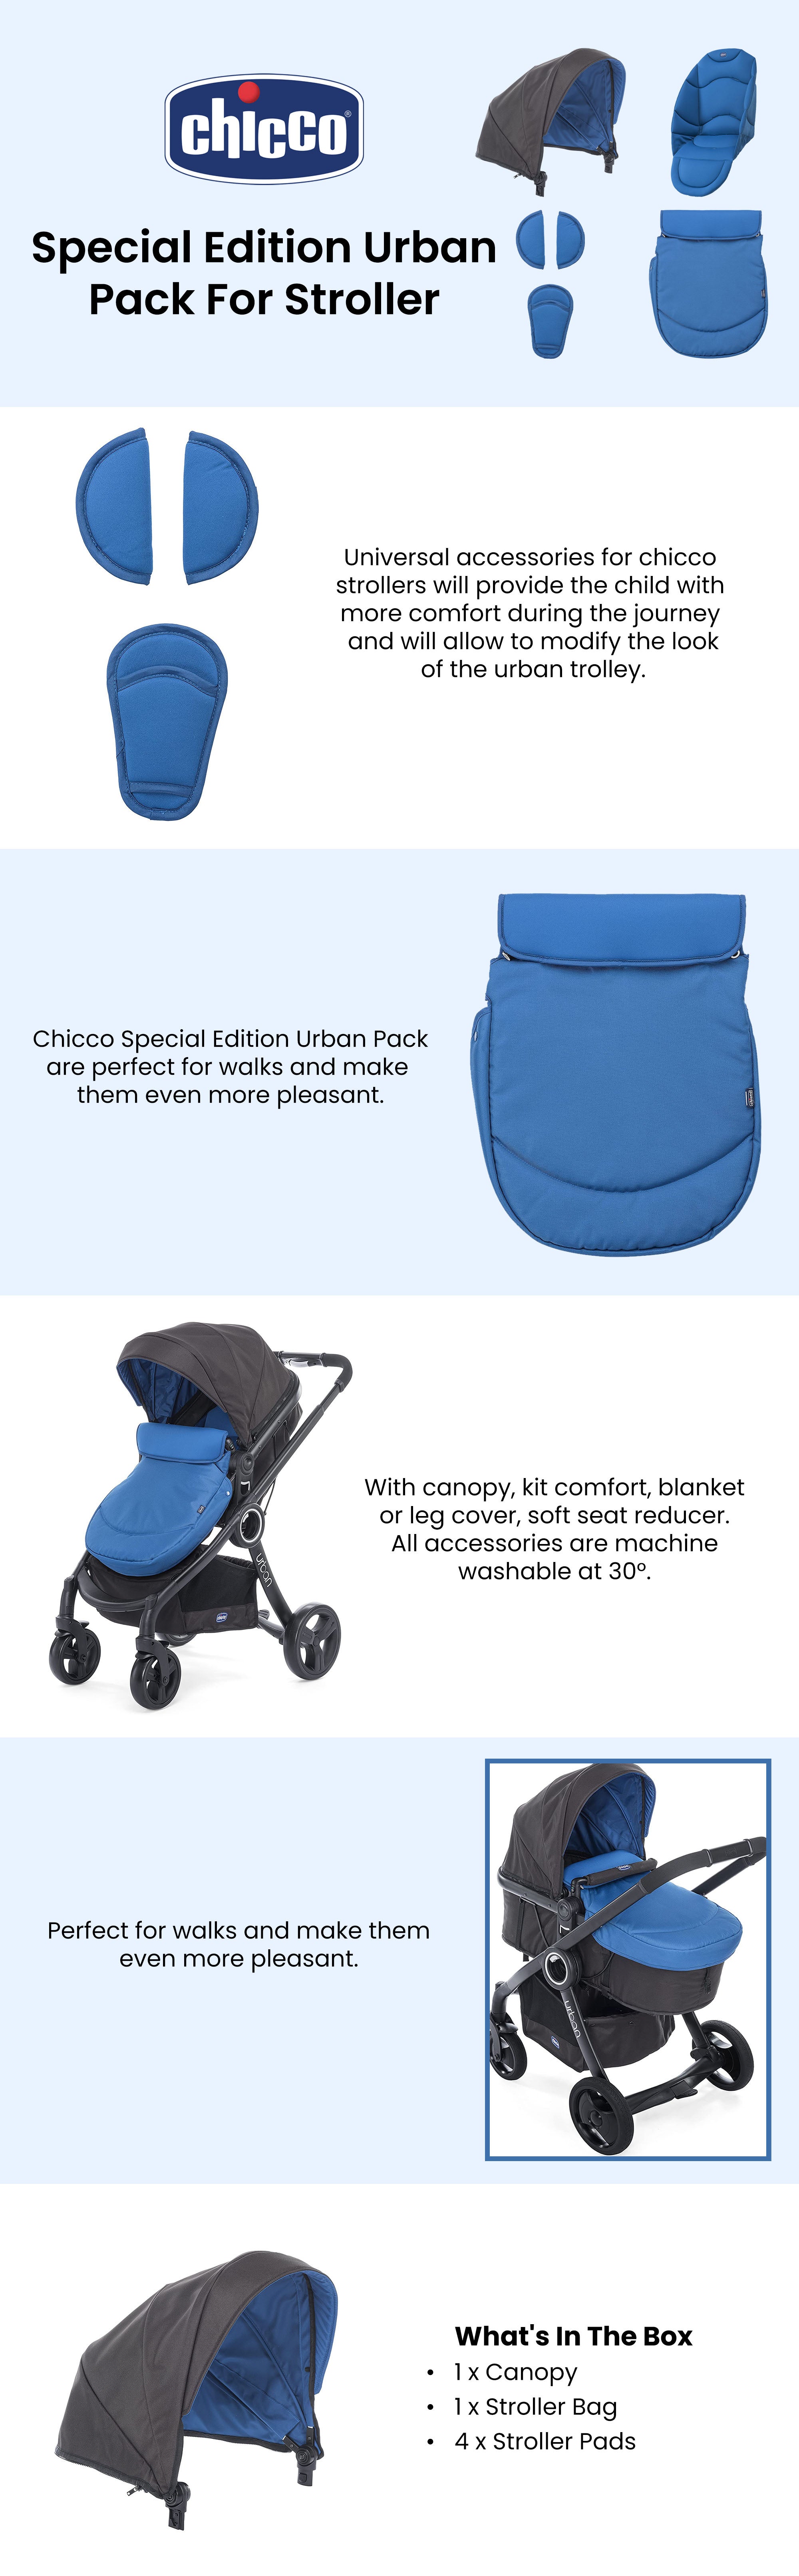 Special Edition Urban Pack For Stroller - Power Blue/Grey